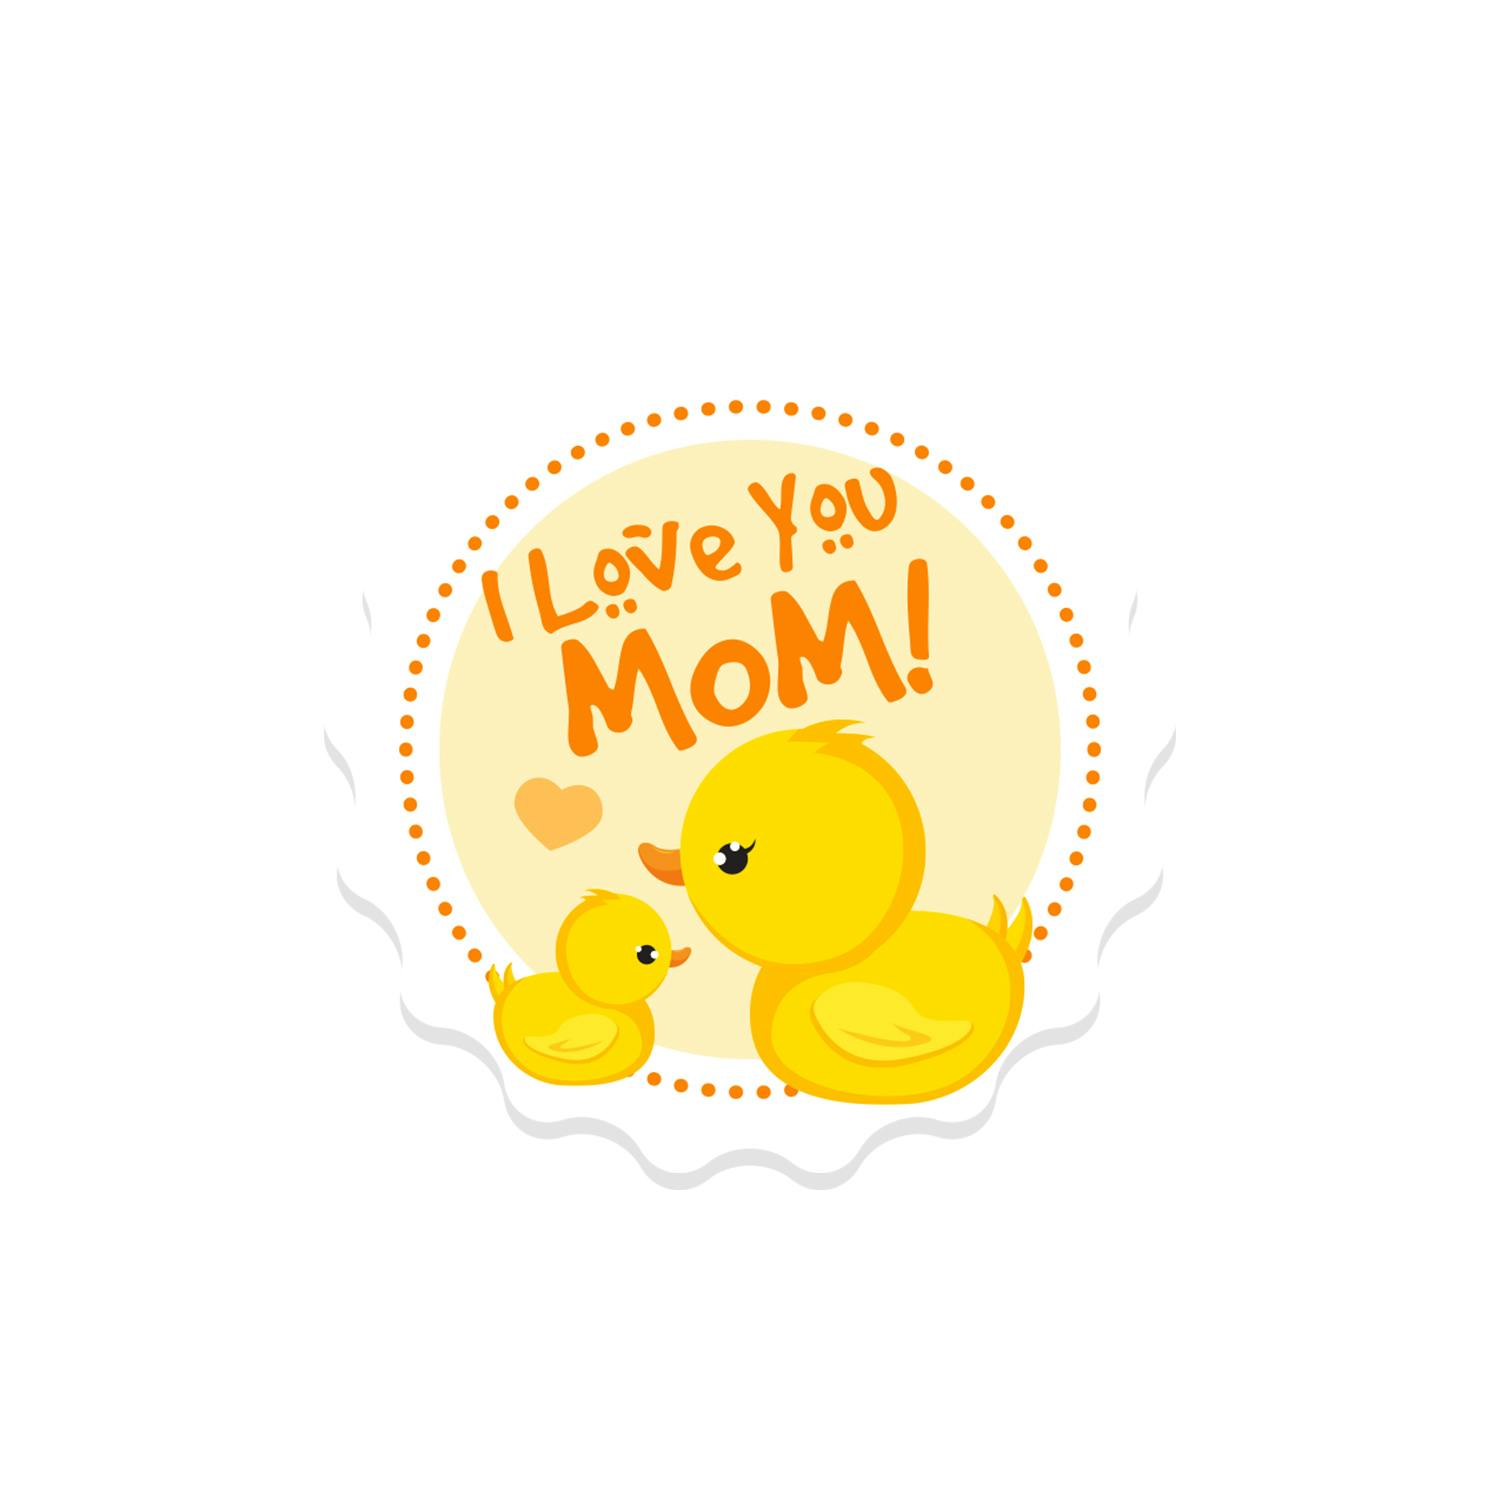 I Love Mom Fridge Magnet - Express Your Love and Appreciation!